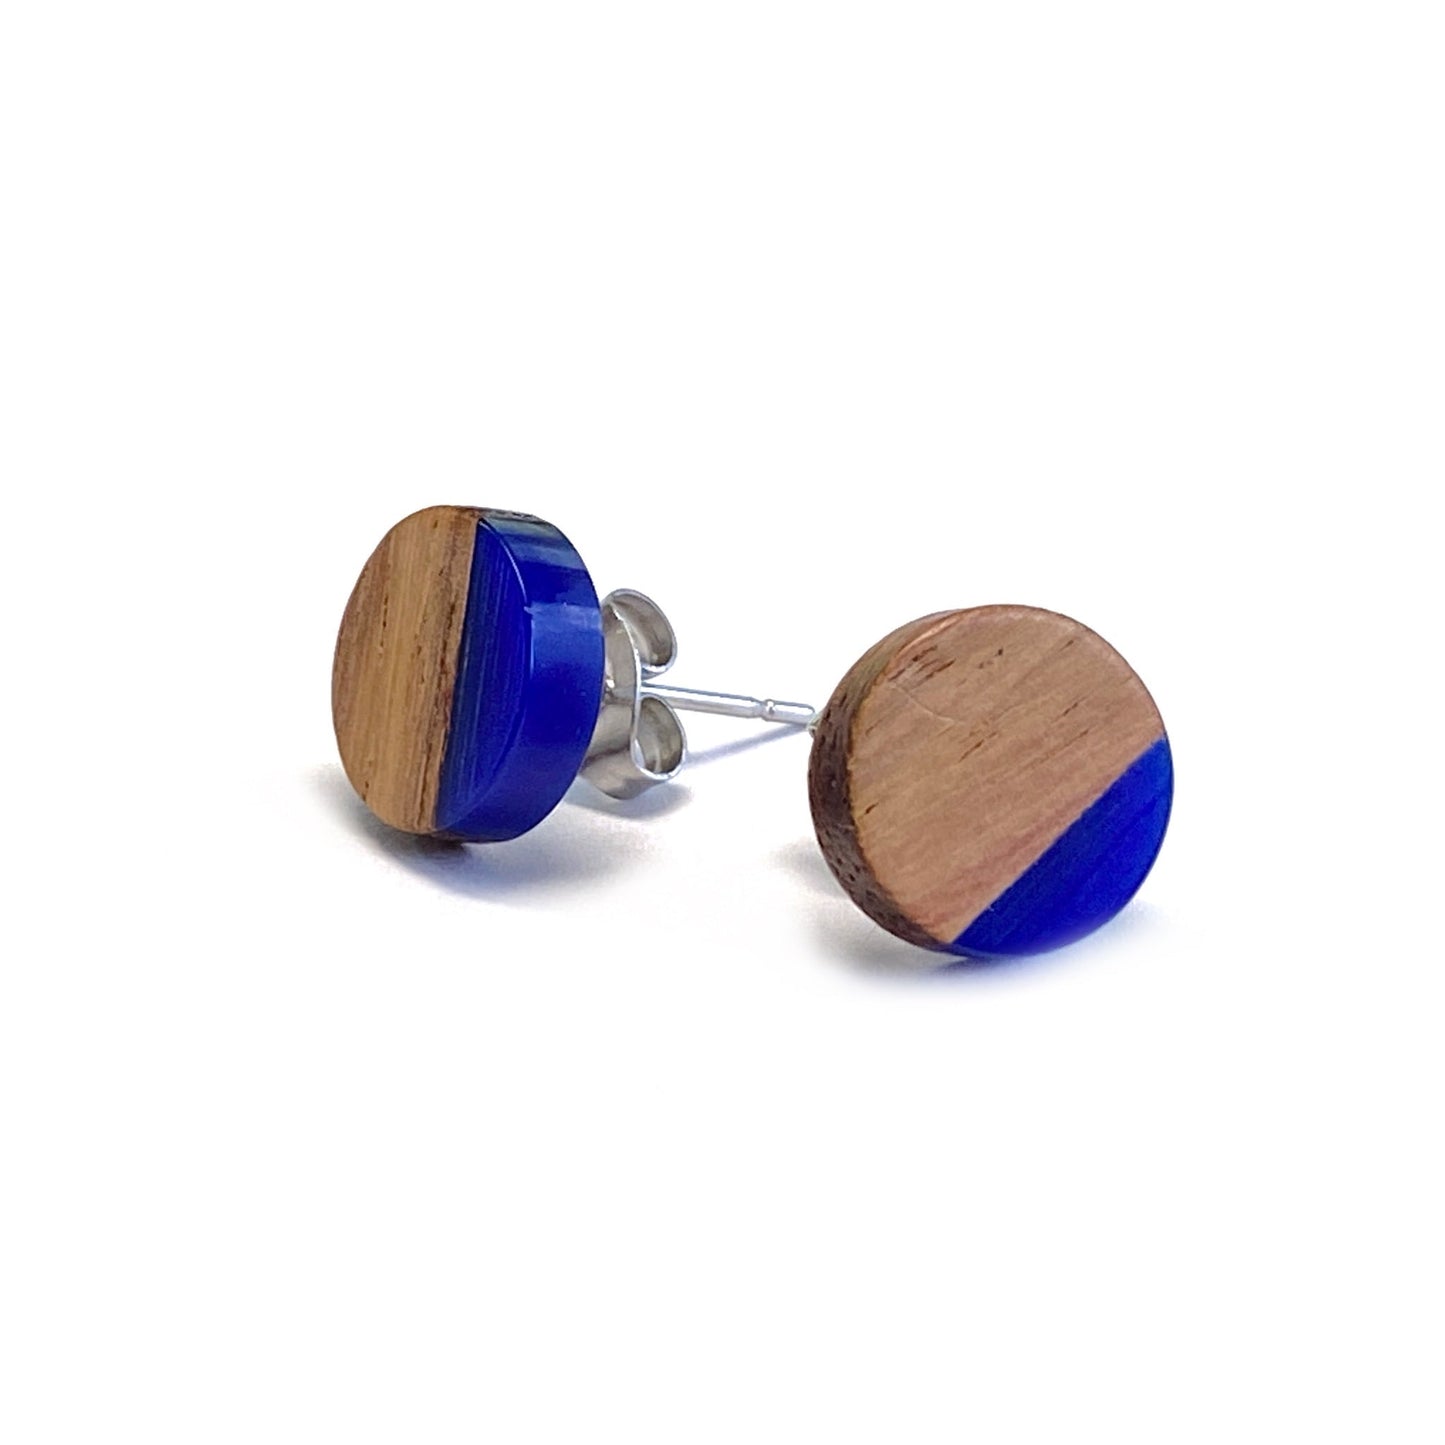 Let The Good Times Roll Earrings in Blue